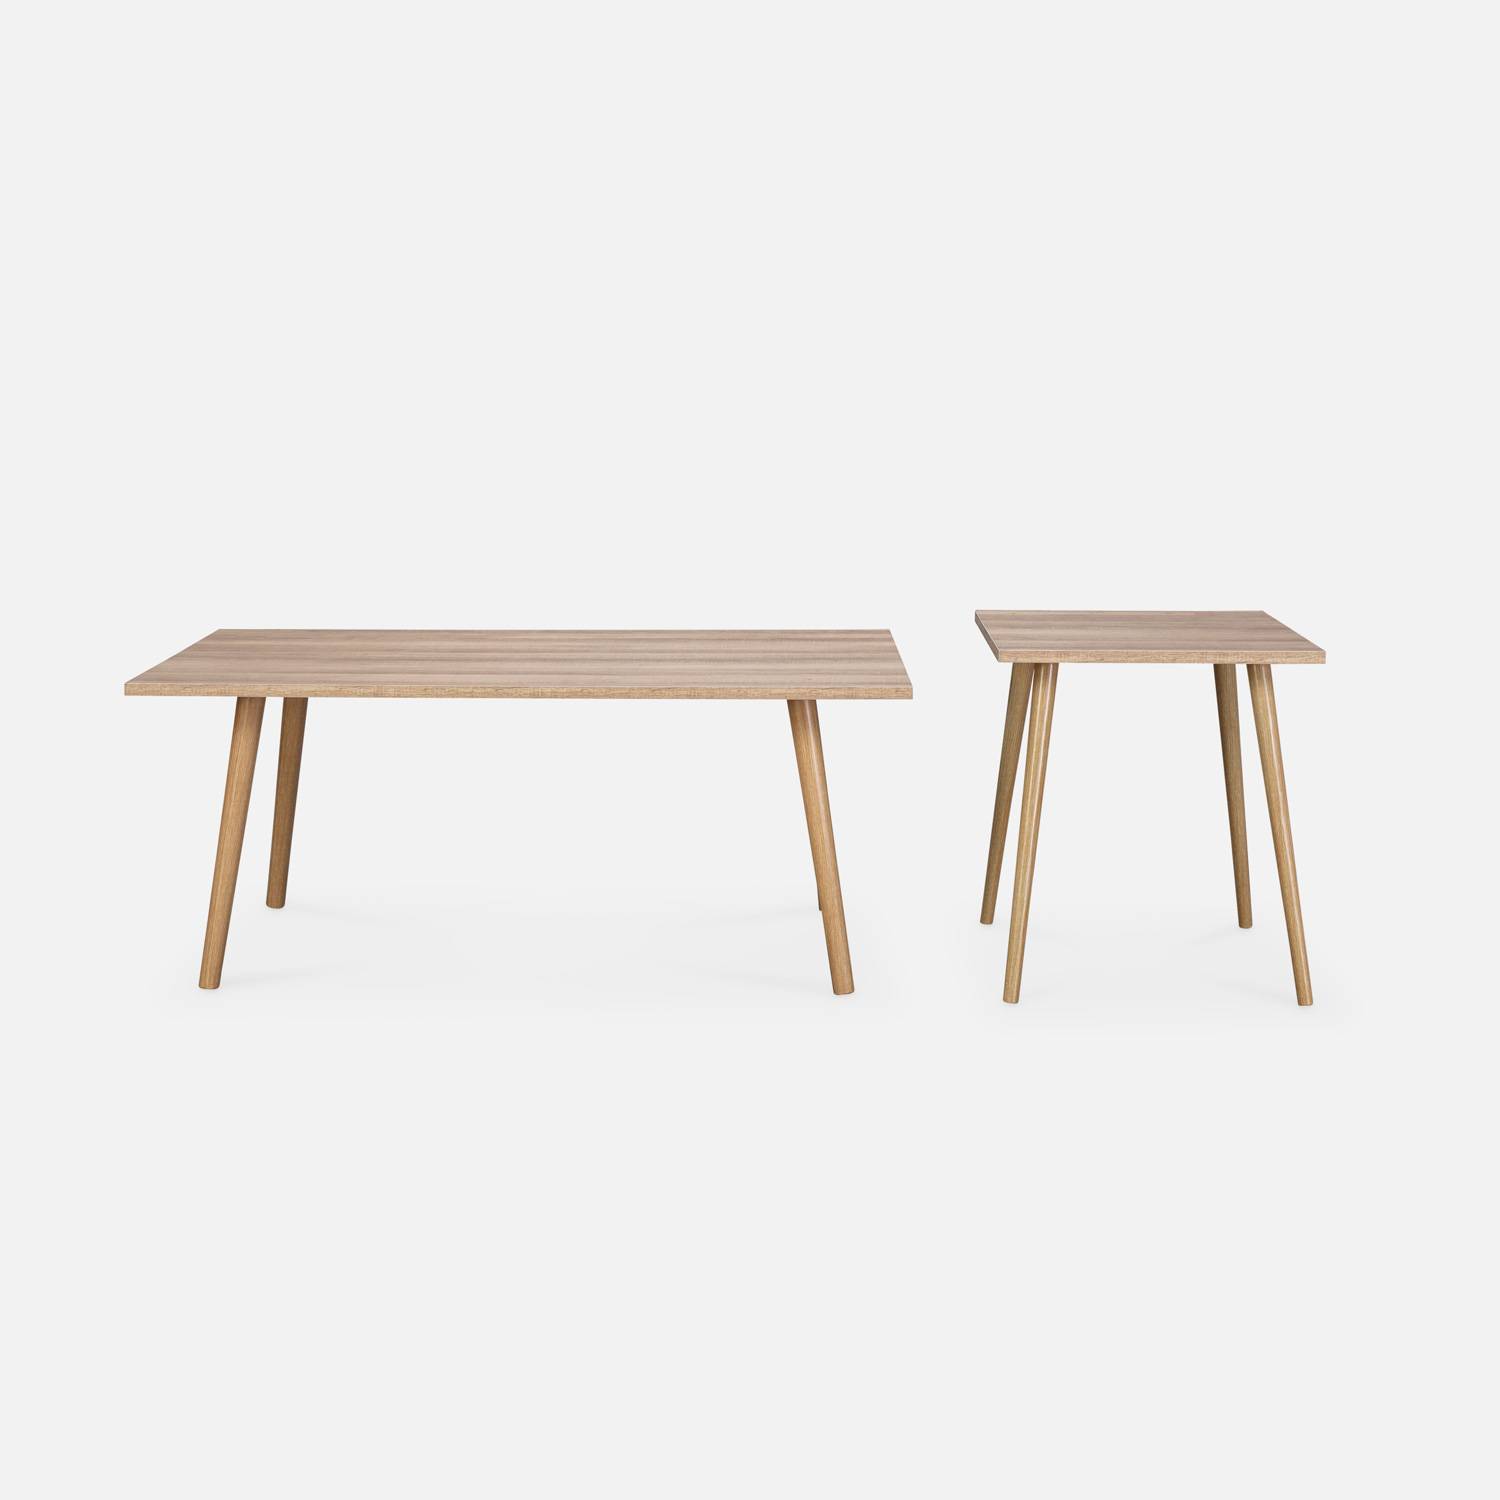 Pair of Scandi-style side tables, 110x59x45.5, 45x45x42.5cm, Scandi, Natural wood colour,sweeek,Photo4